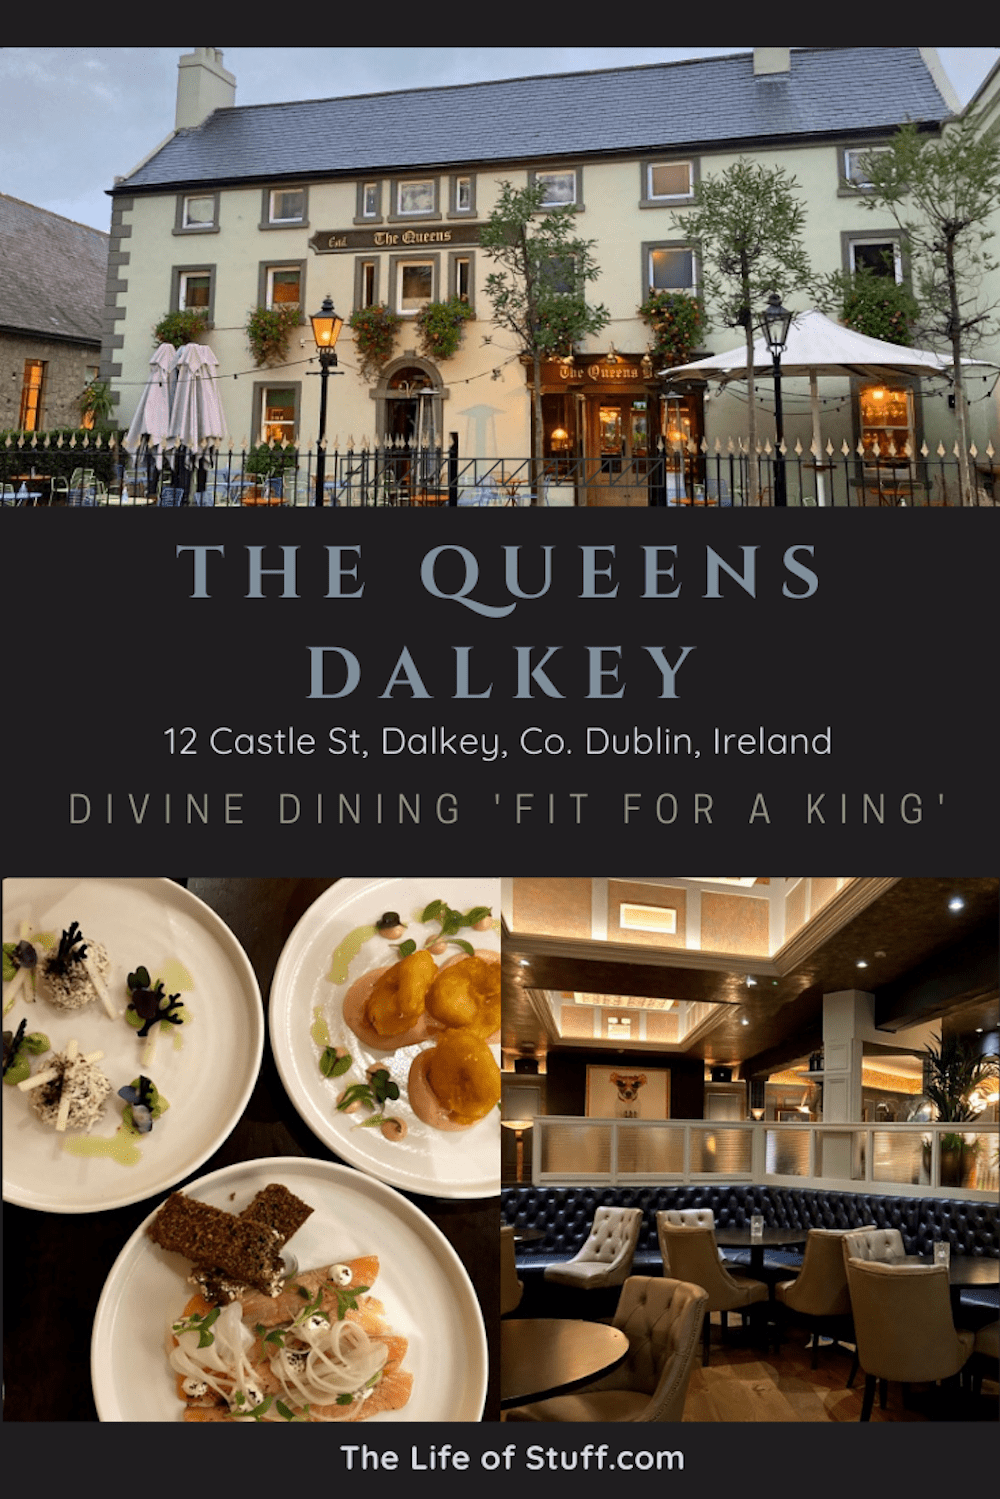 The Queens Dalkey - Divine Dining in Dublin 'Fit for a King' - The Life of Stuff